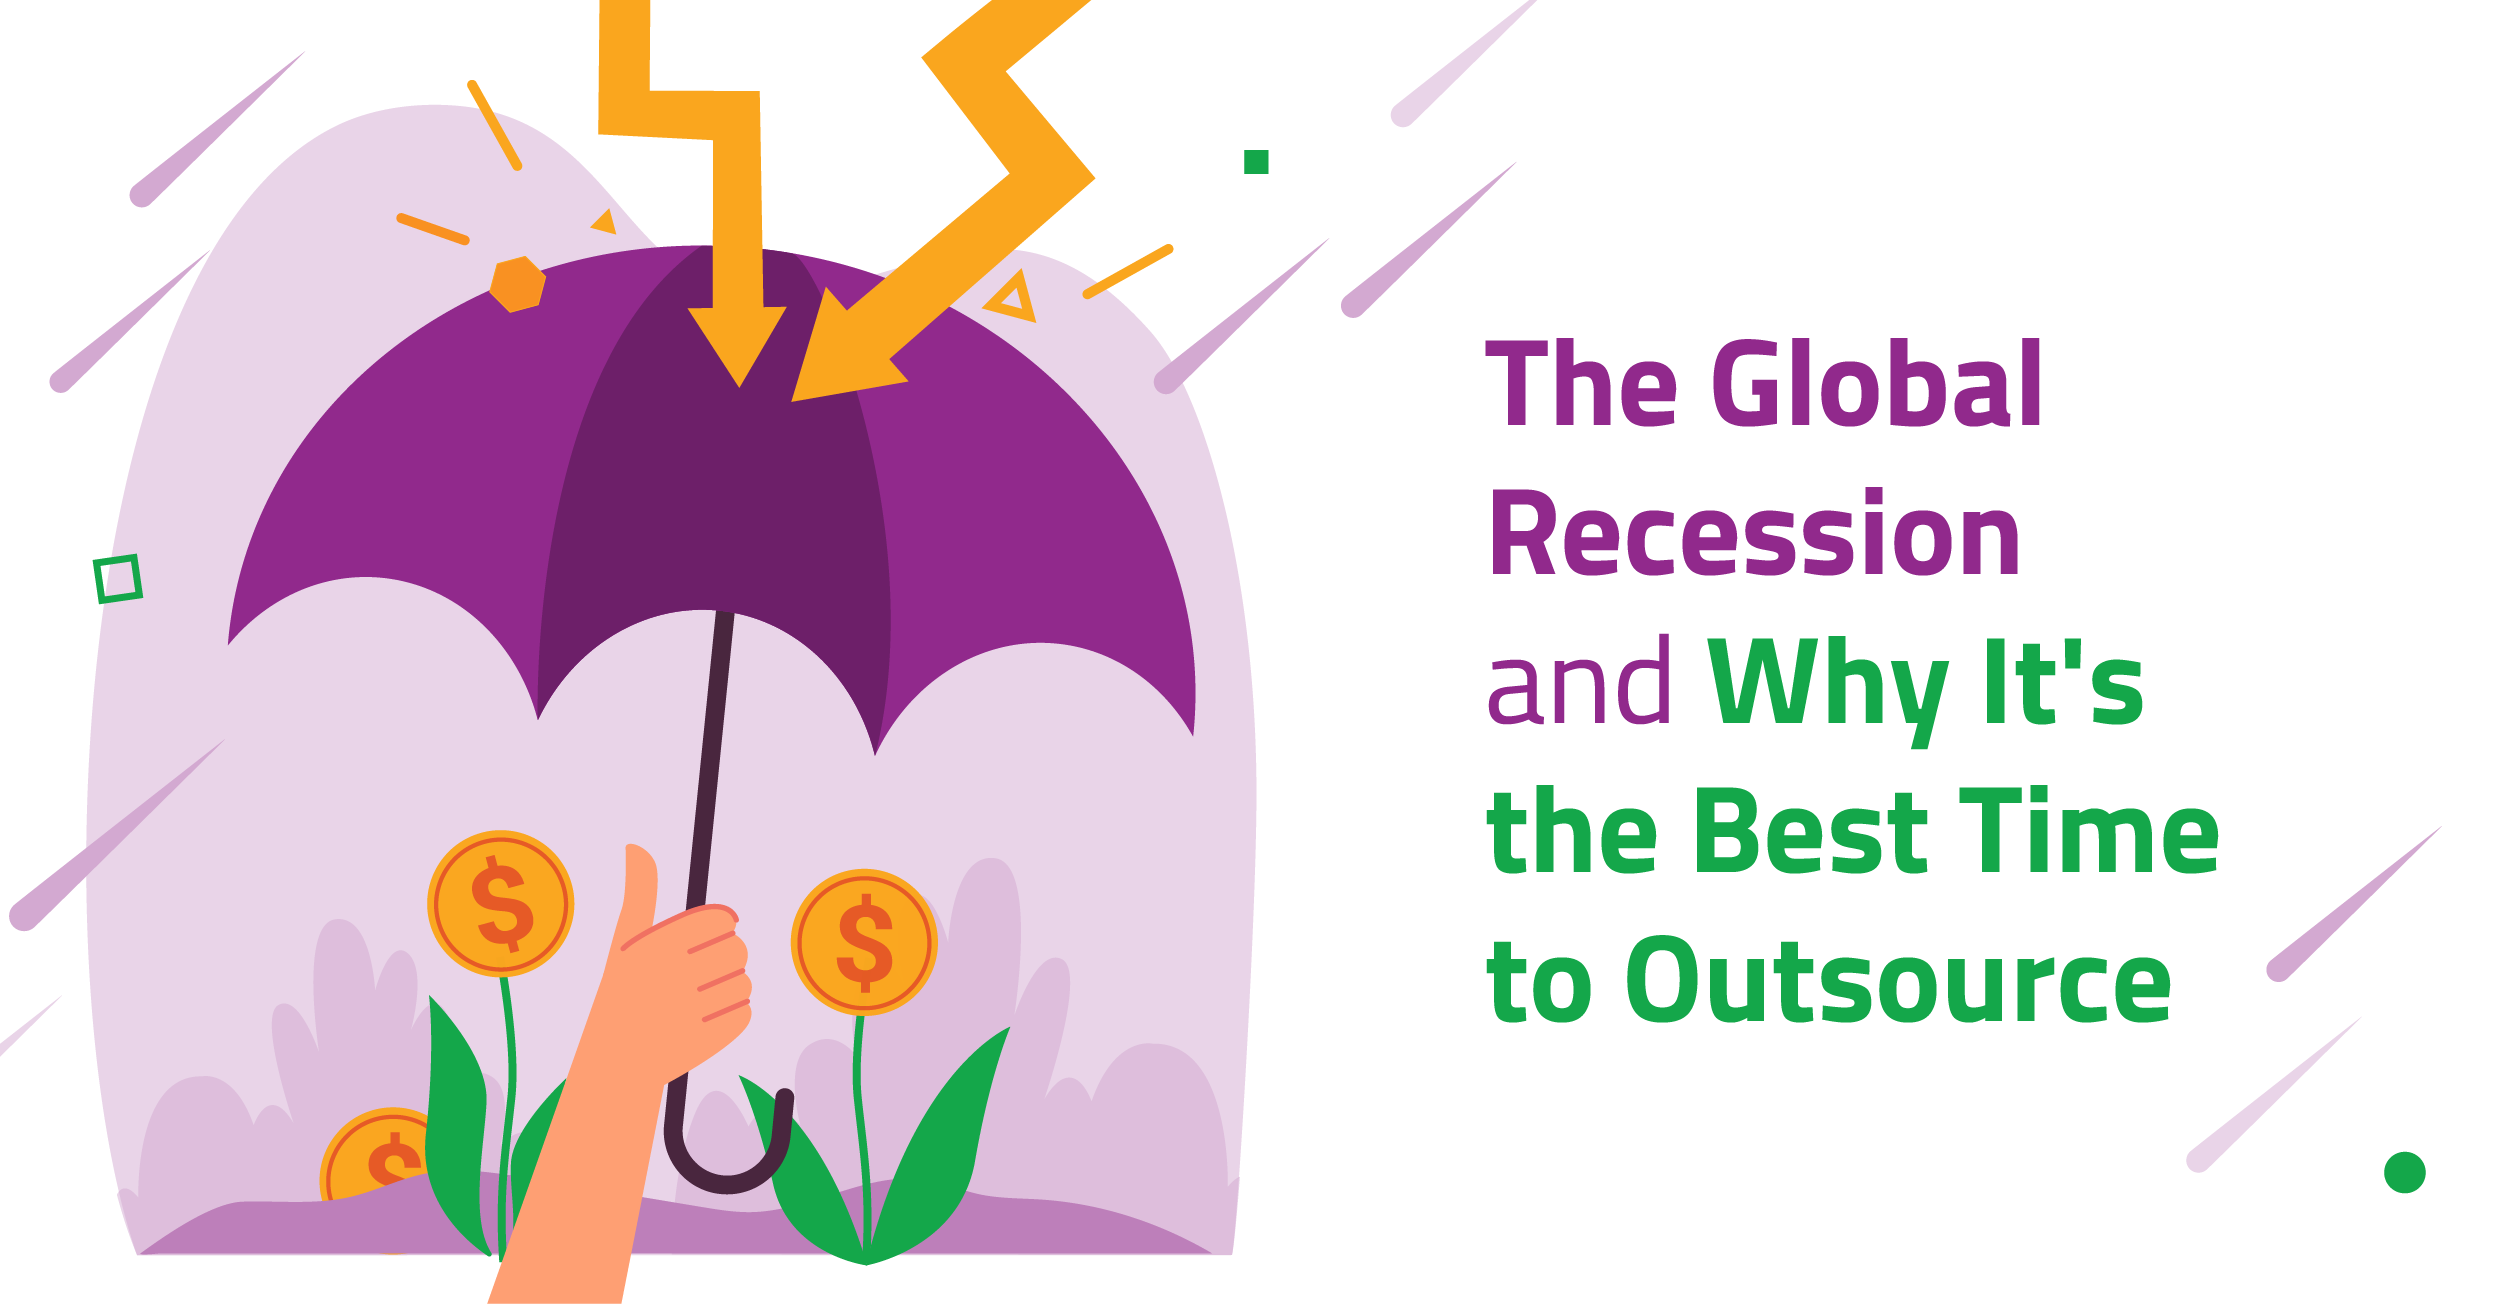 The Global Recession and Why It’s the Best Time to Outsource